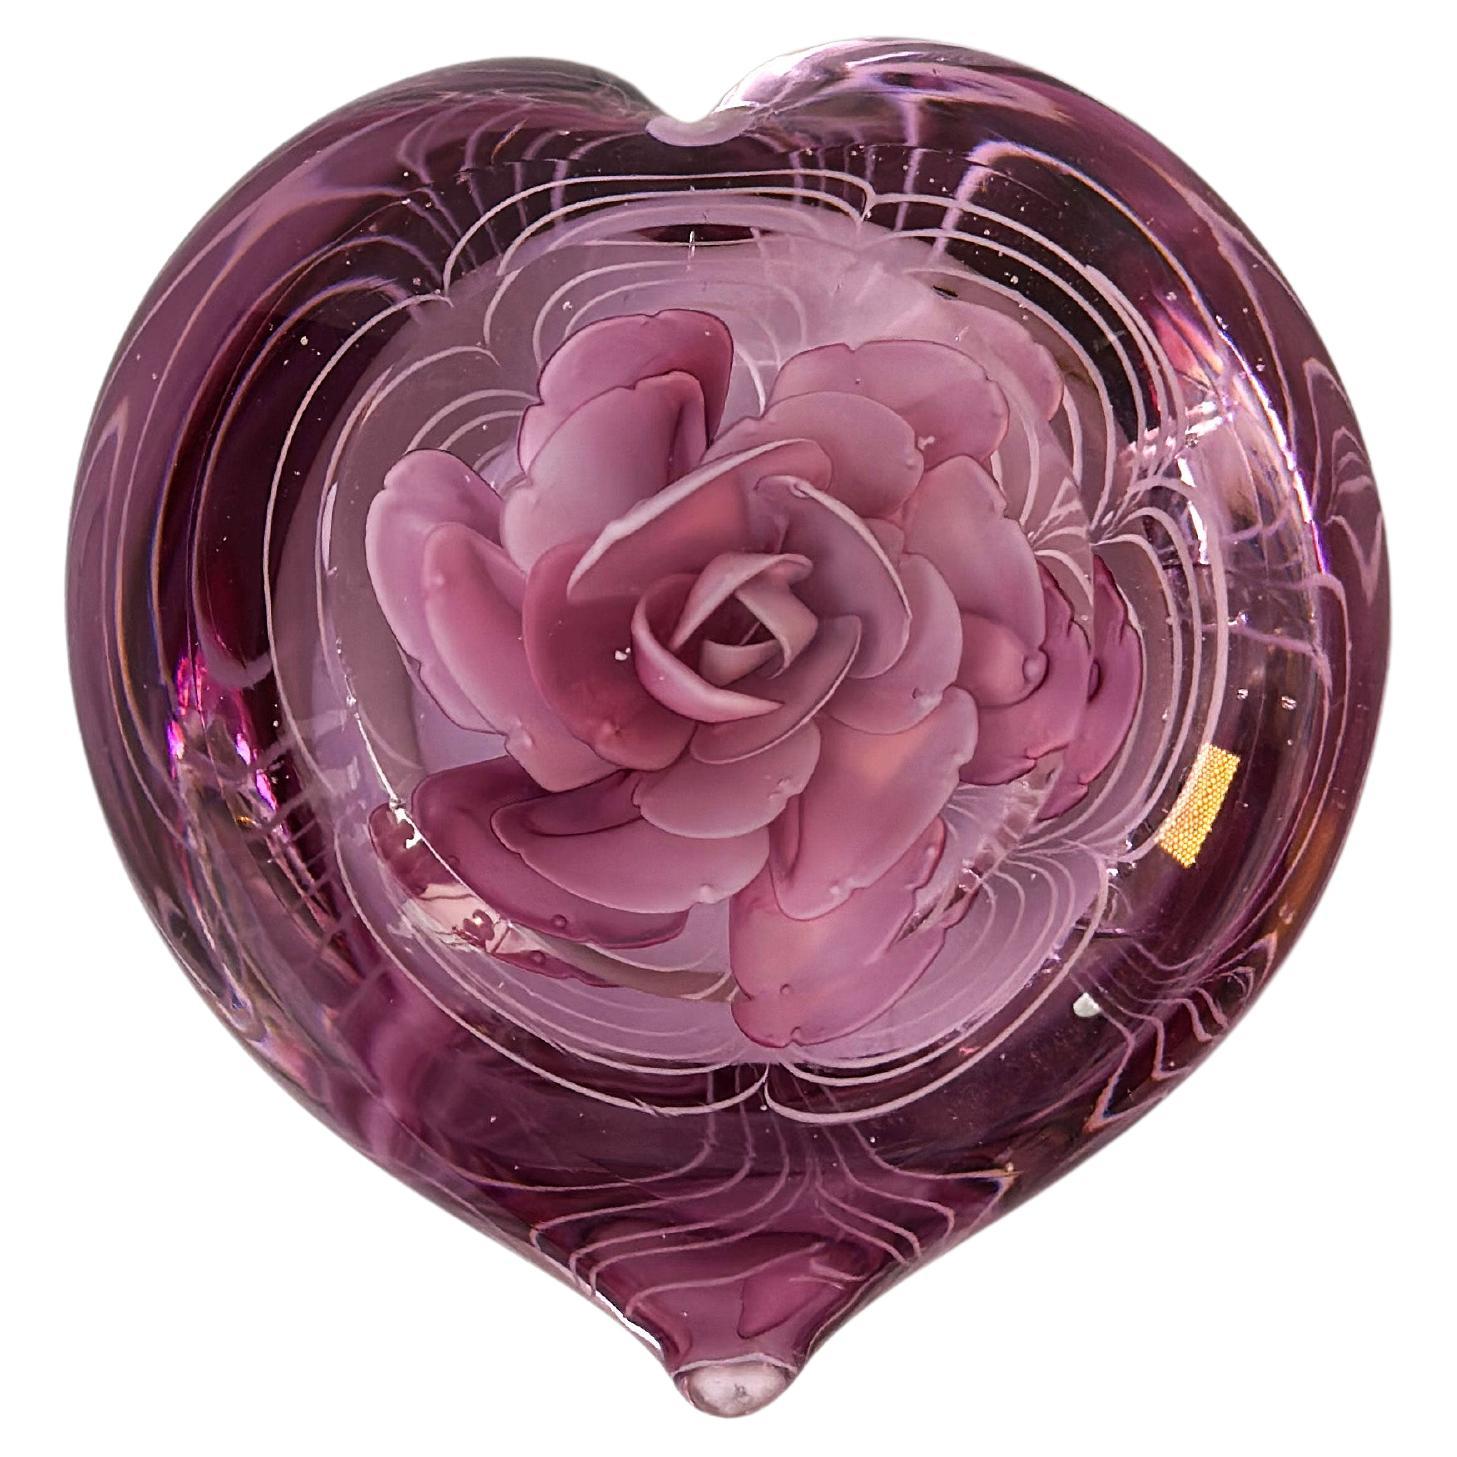 Vintage Heart Shaped Pink Glass Paperweight with Rose Petal Centre